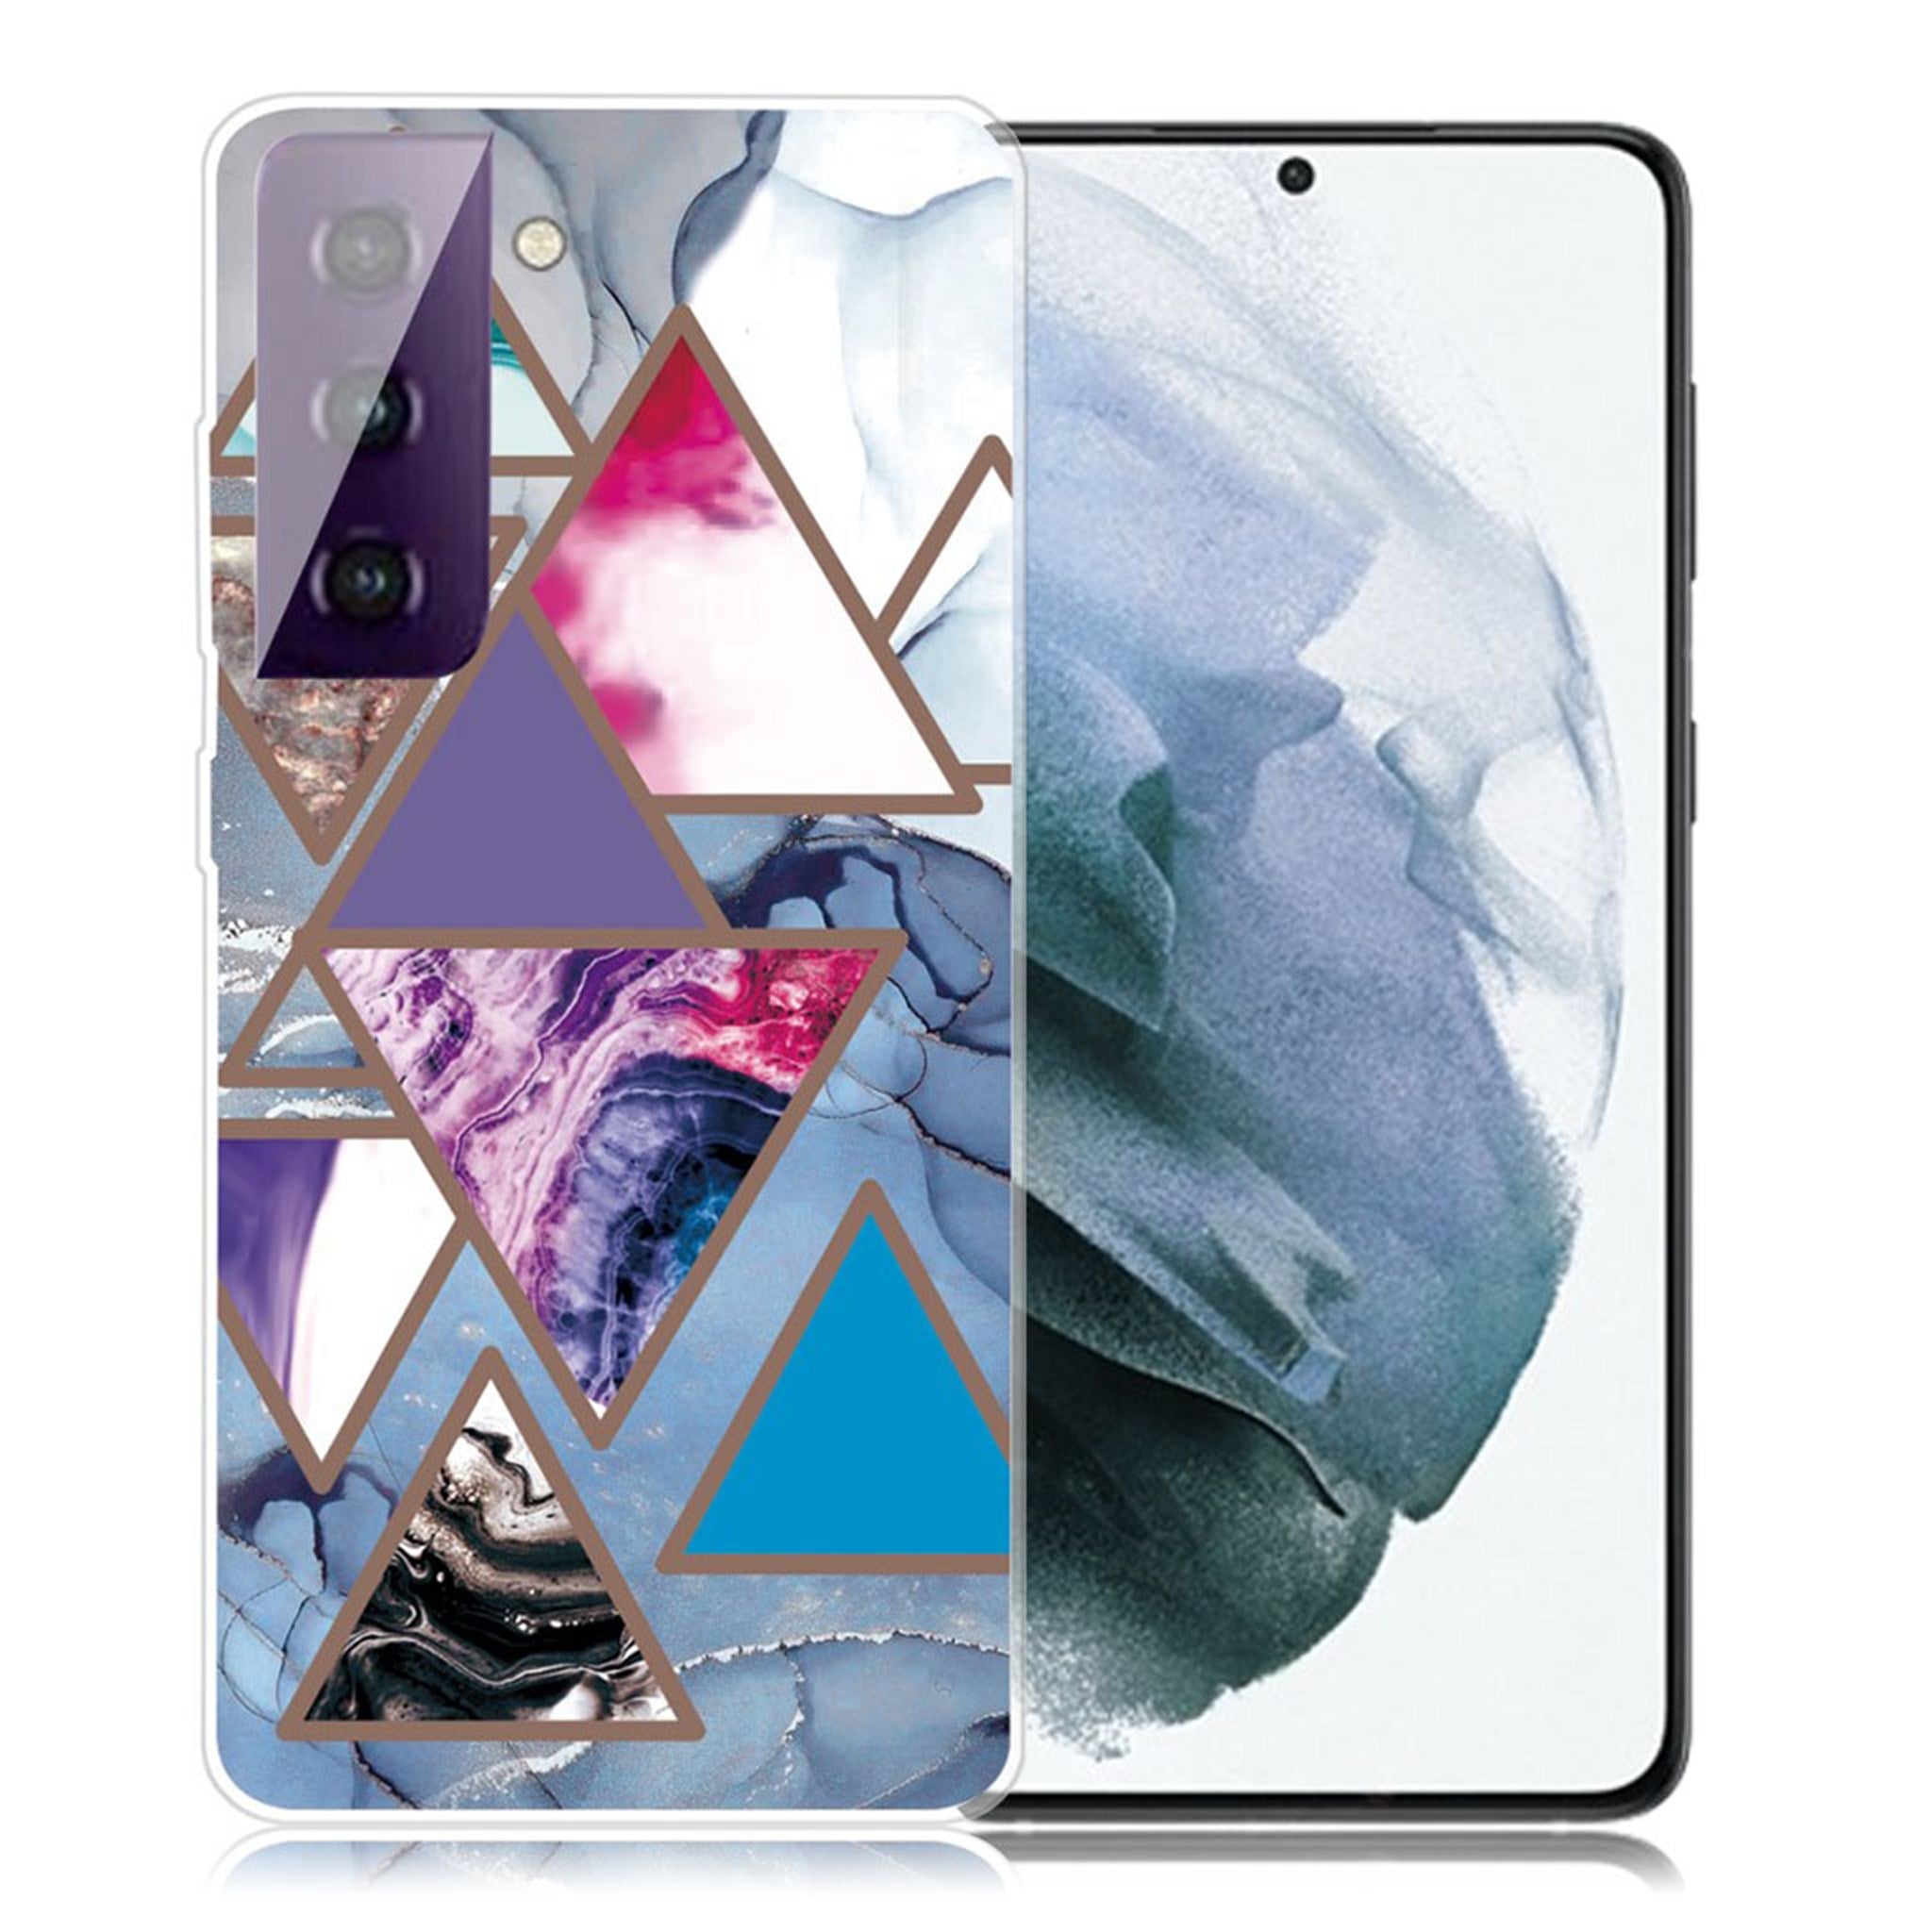 Marble Samsung Galaxy S21 Plus case - Triangle Patterns in Marble